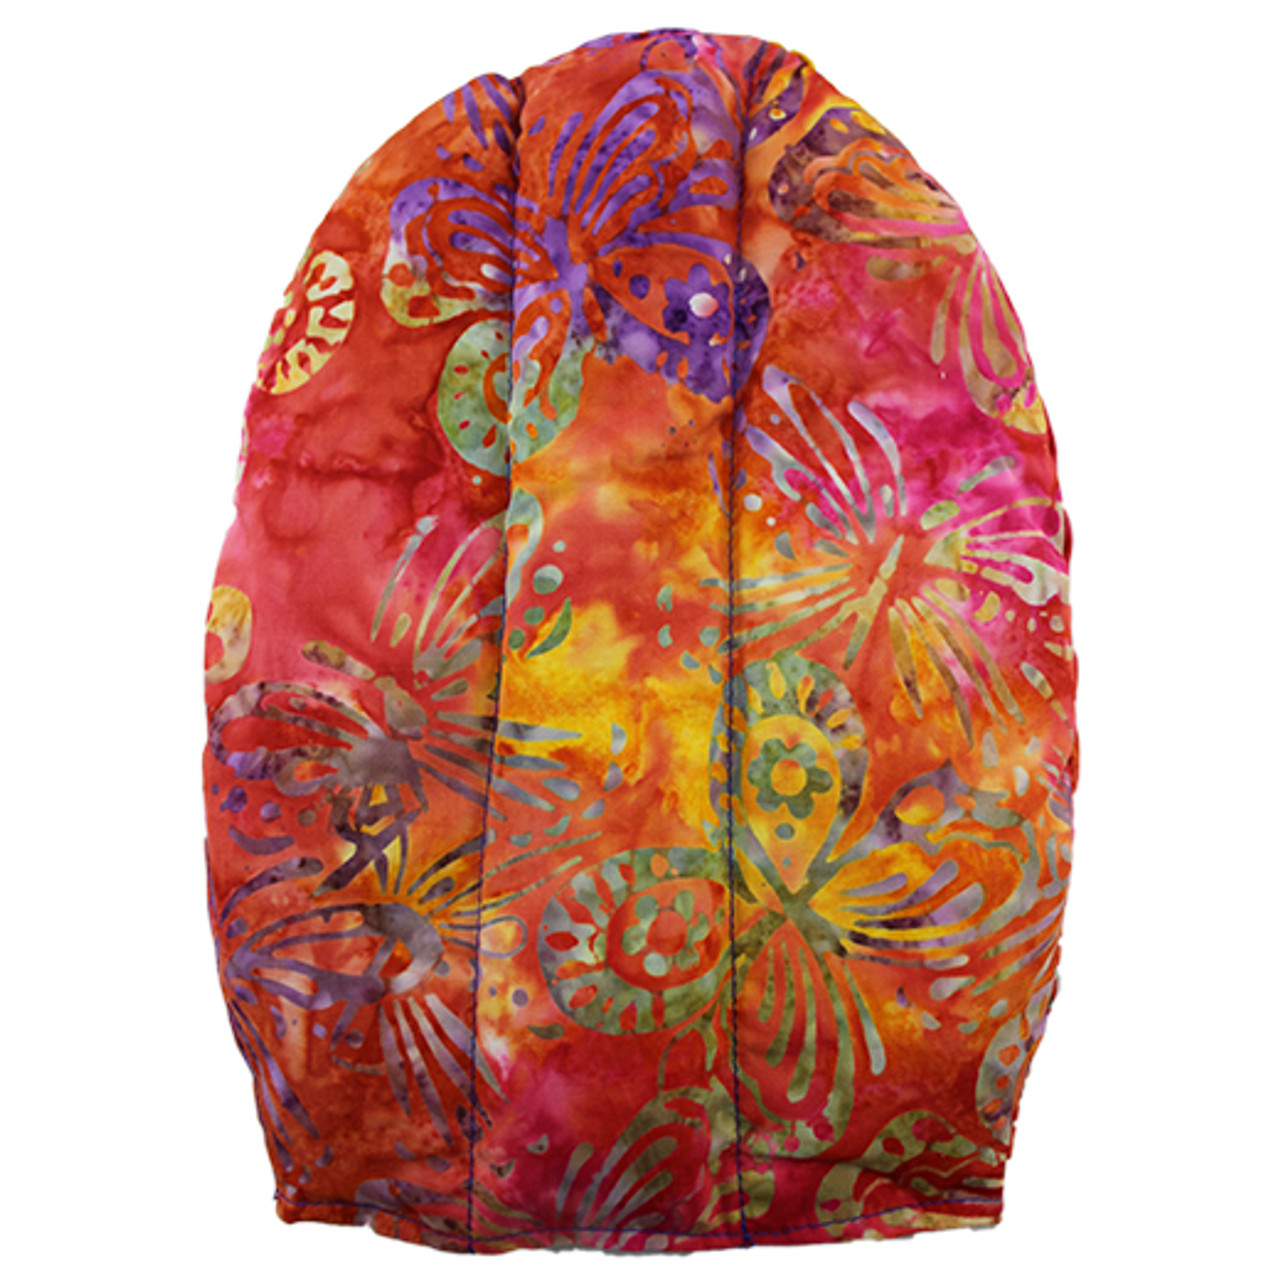 Hand Mitt Provide Relief from Hand and Wrist Pain - Batik Butterfly Fabric